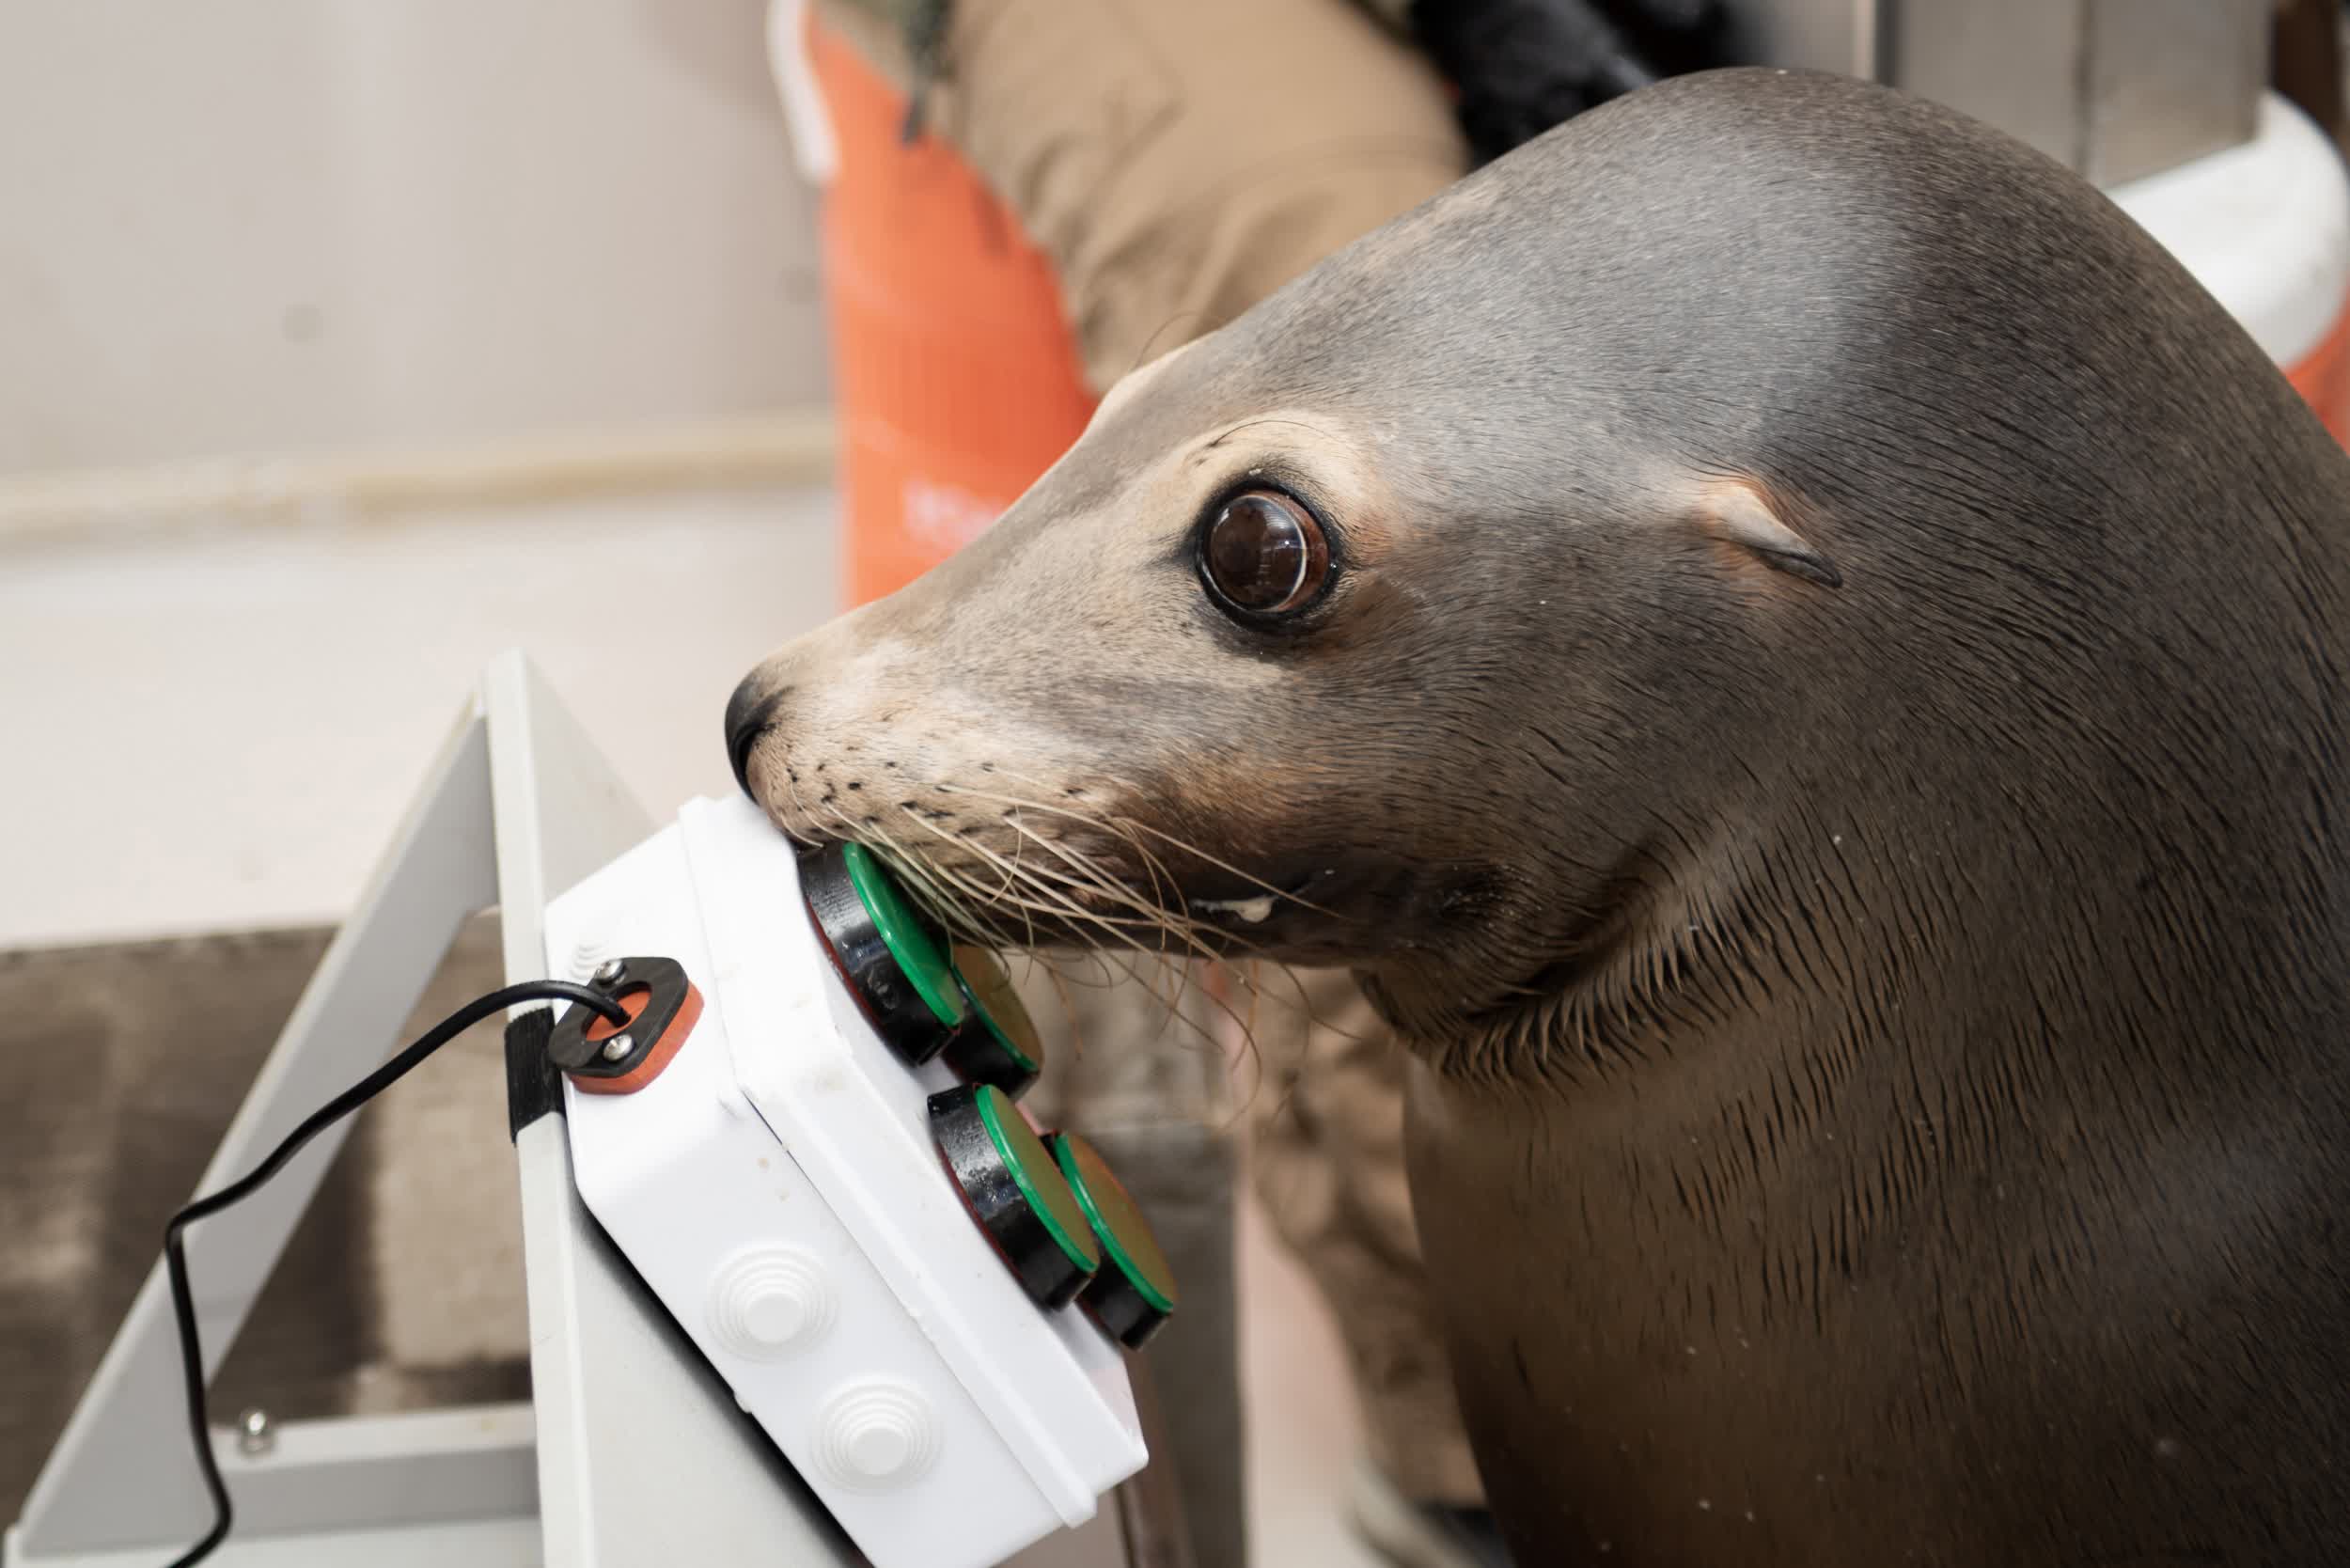 Navy sea lions enjoy unwinding with a good video game